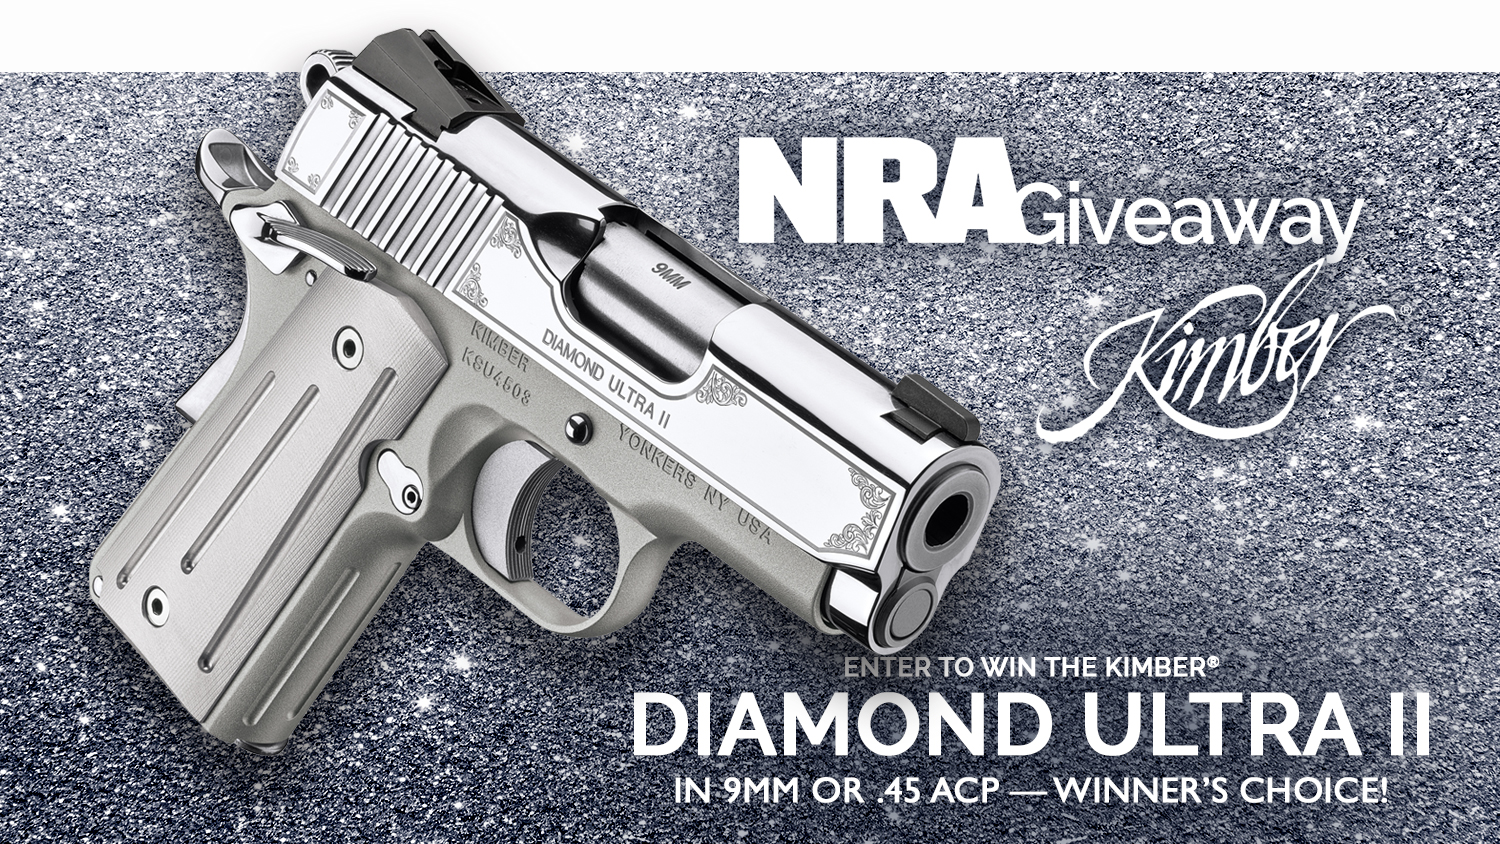 Enter the Kimber NRA Giveaway Today!